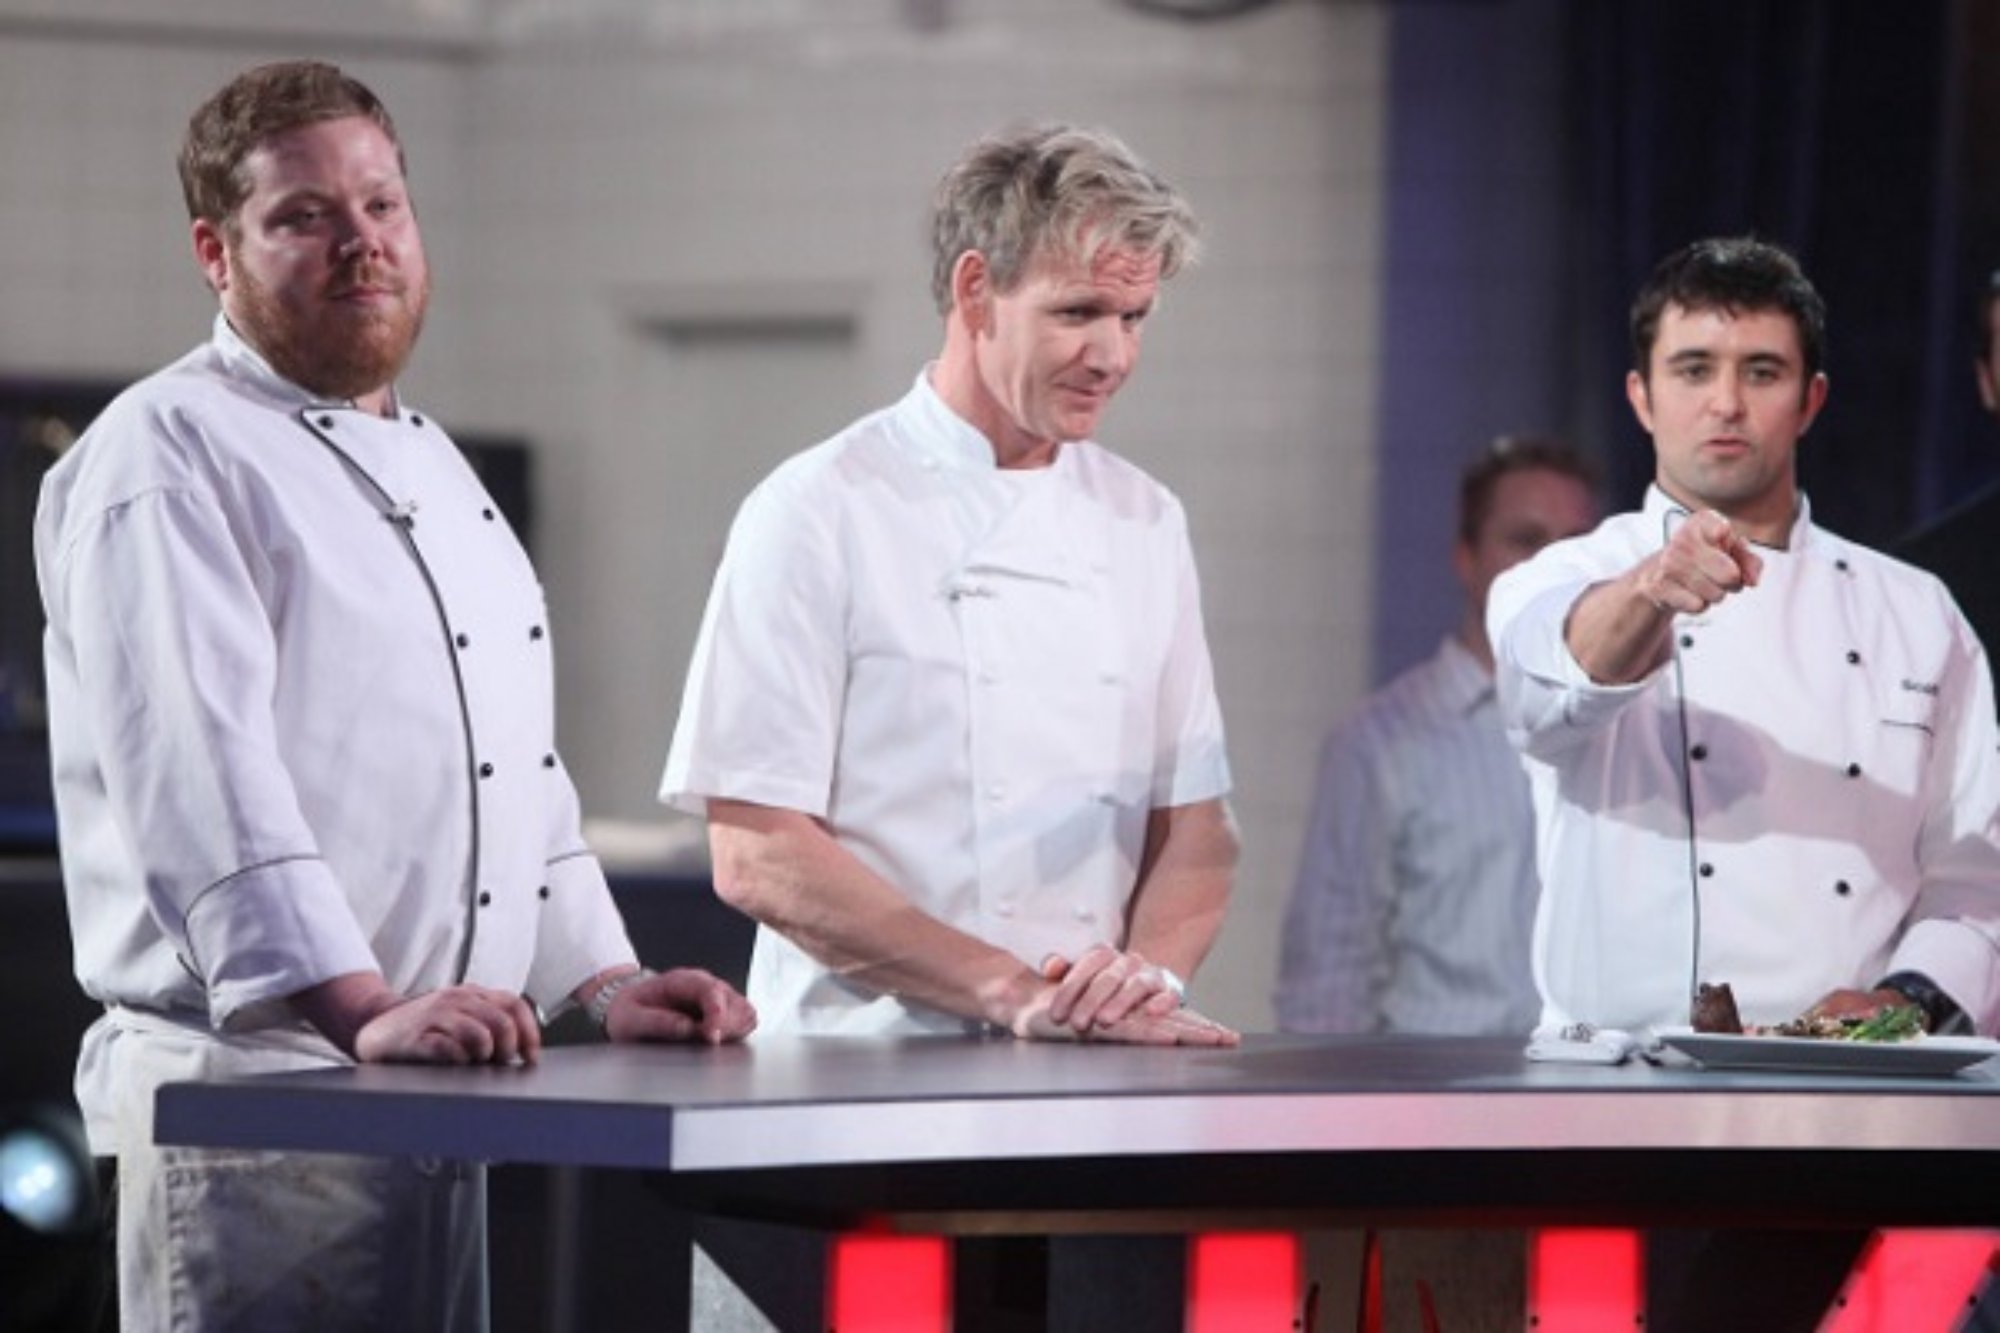 'Hell's Kitchen' Season 12 Jason Zepaltas, Gordon Ramsay, and Scott Commings picking final brigade standing behind a desk. Scott holding his hand out, pointing.